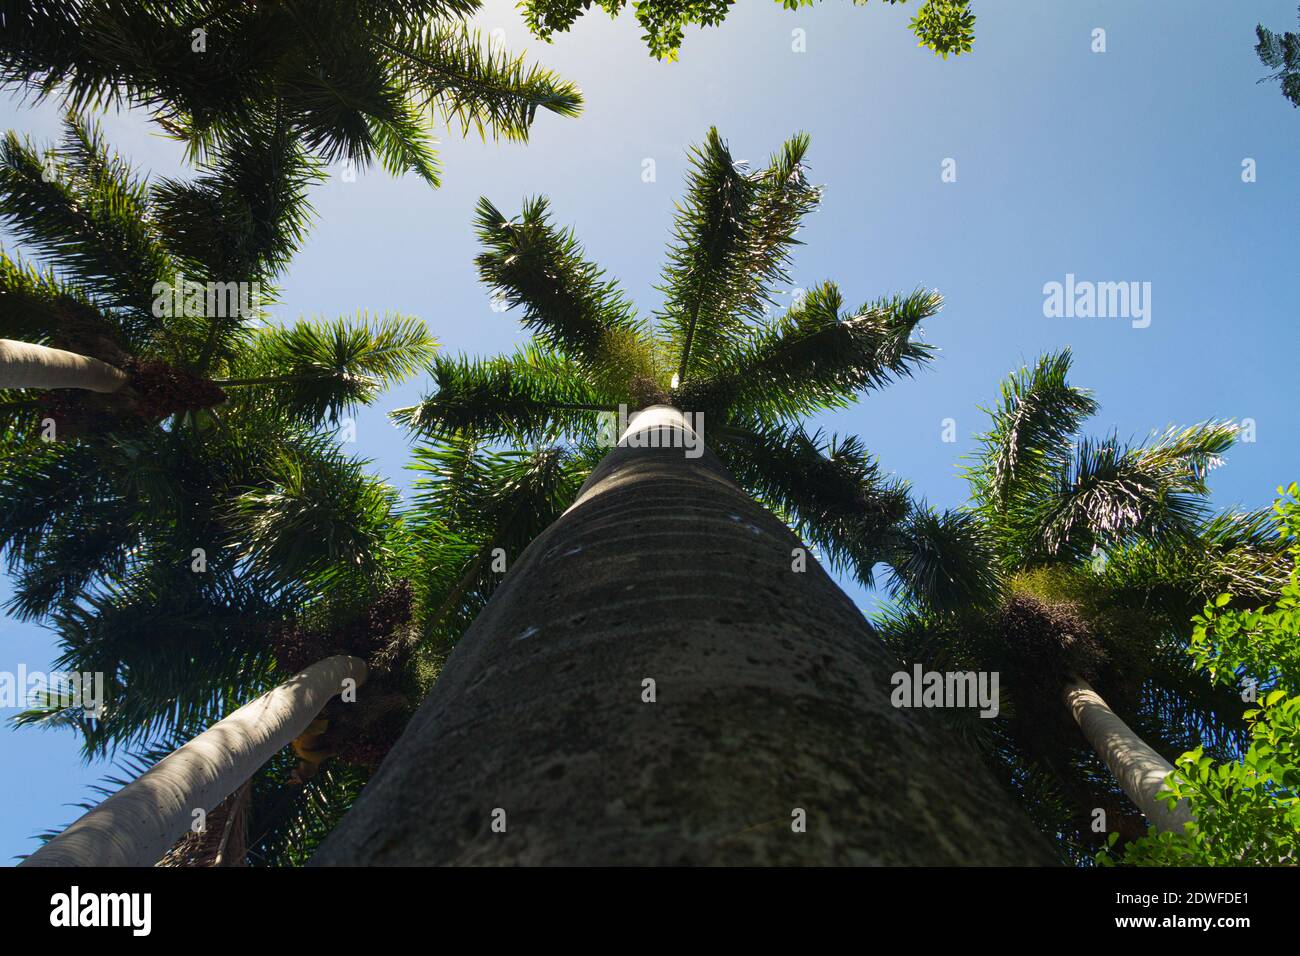 Looking up of palm tress with a blue sky in a sunny day. Low angle shot. Stock Photo